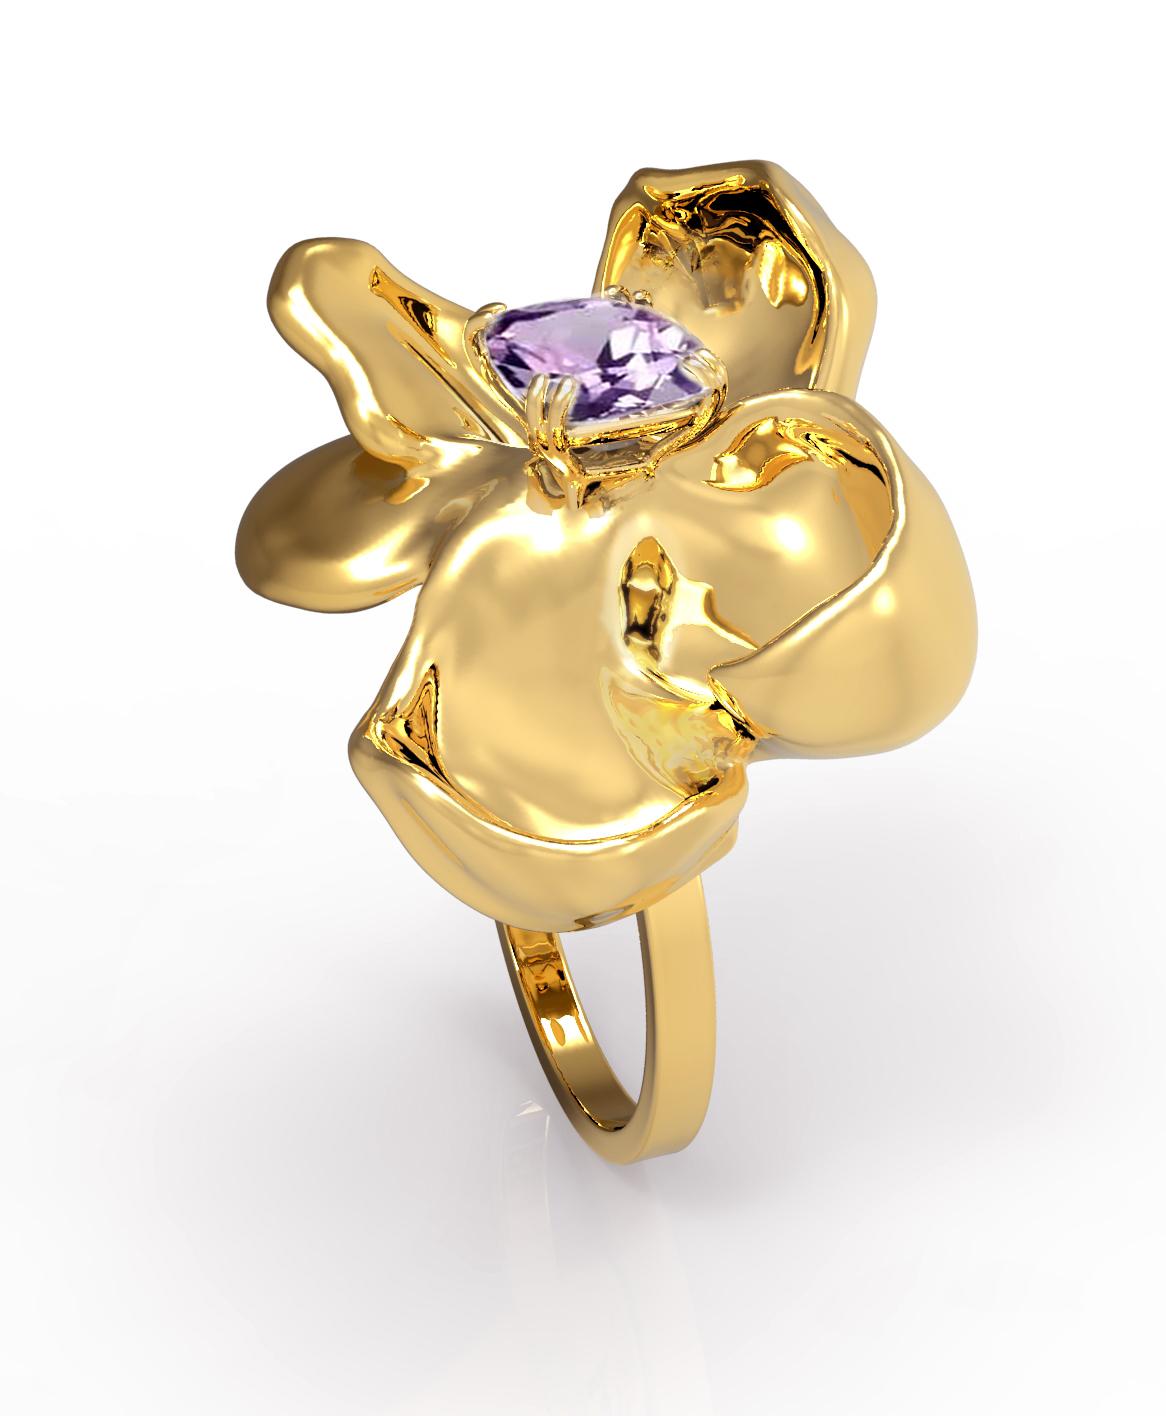 This Magnolia Flower engagement ring is crafted from 14 karat yellow gold with a captivating amethyst stone. The intricate design is the work of oil painter and 3D jewelry designer, Polya Medvedeva.

The ring boasts a sizable magnolia flower